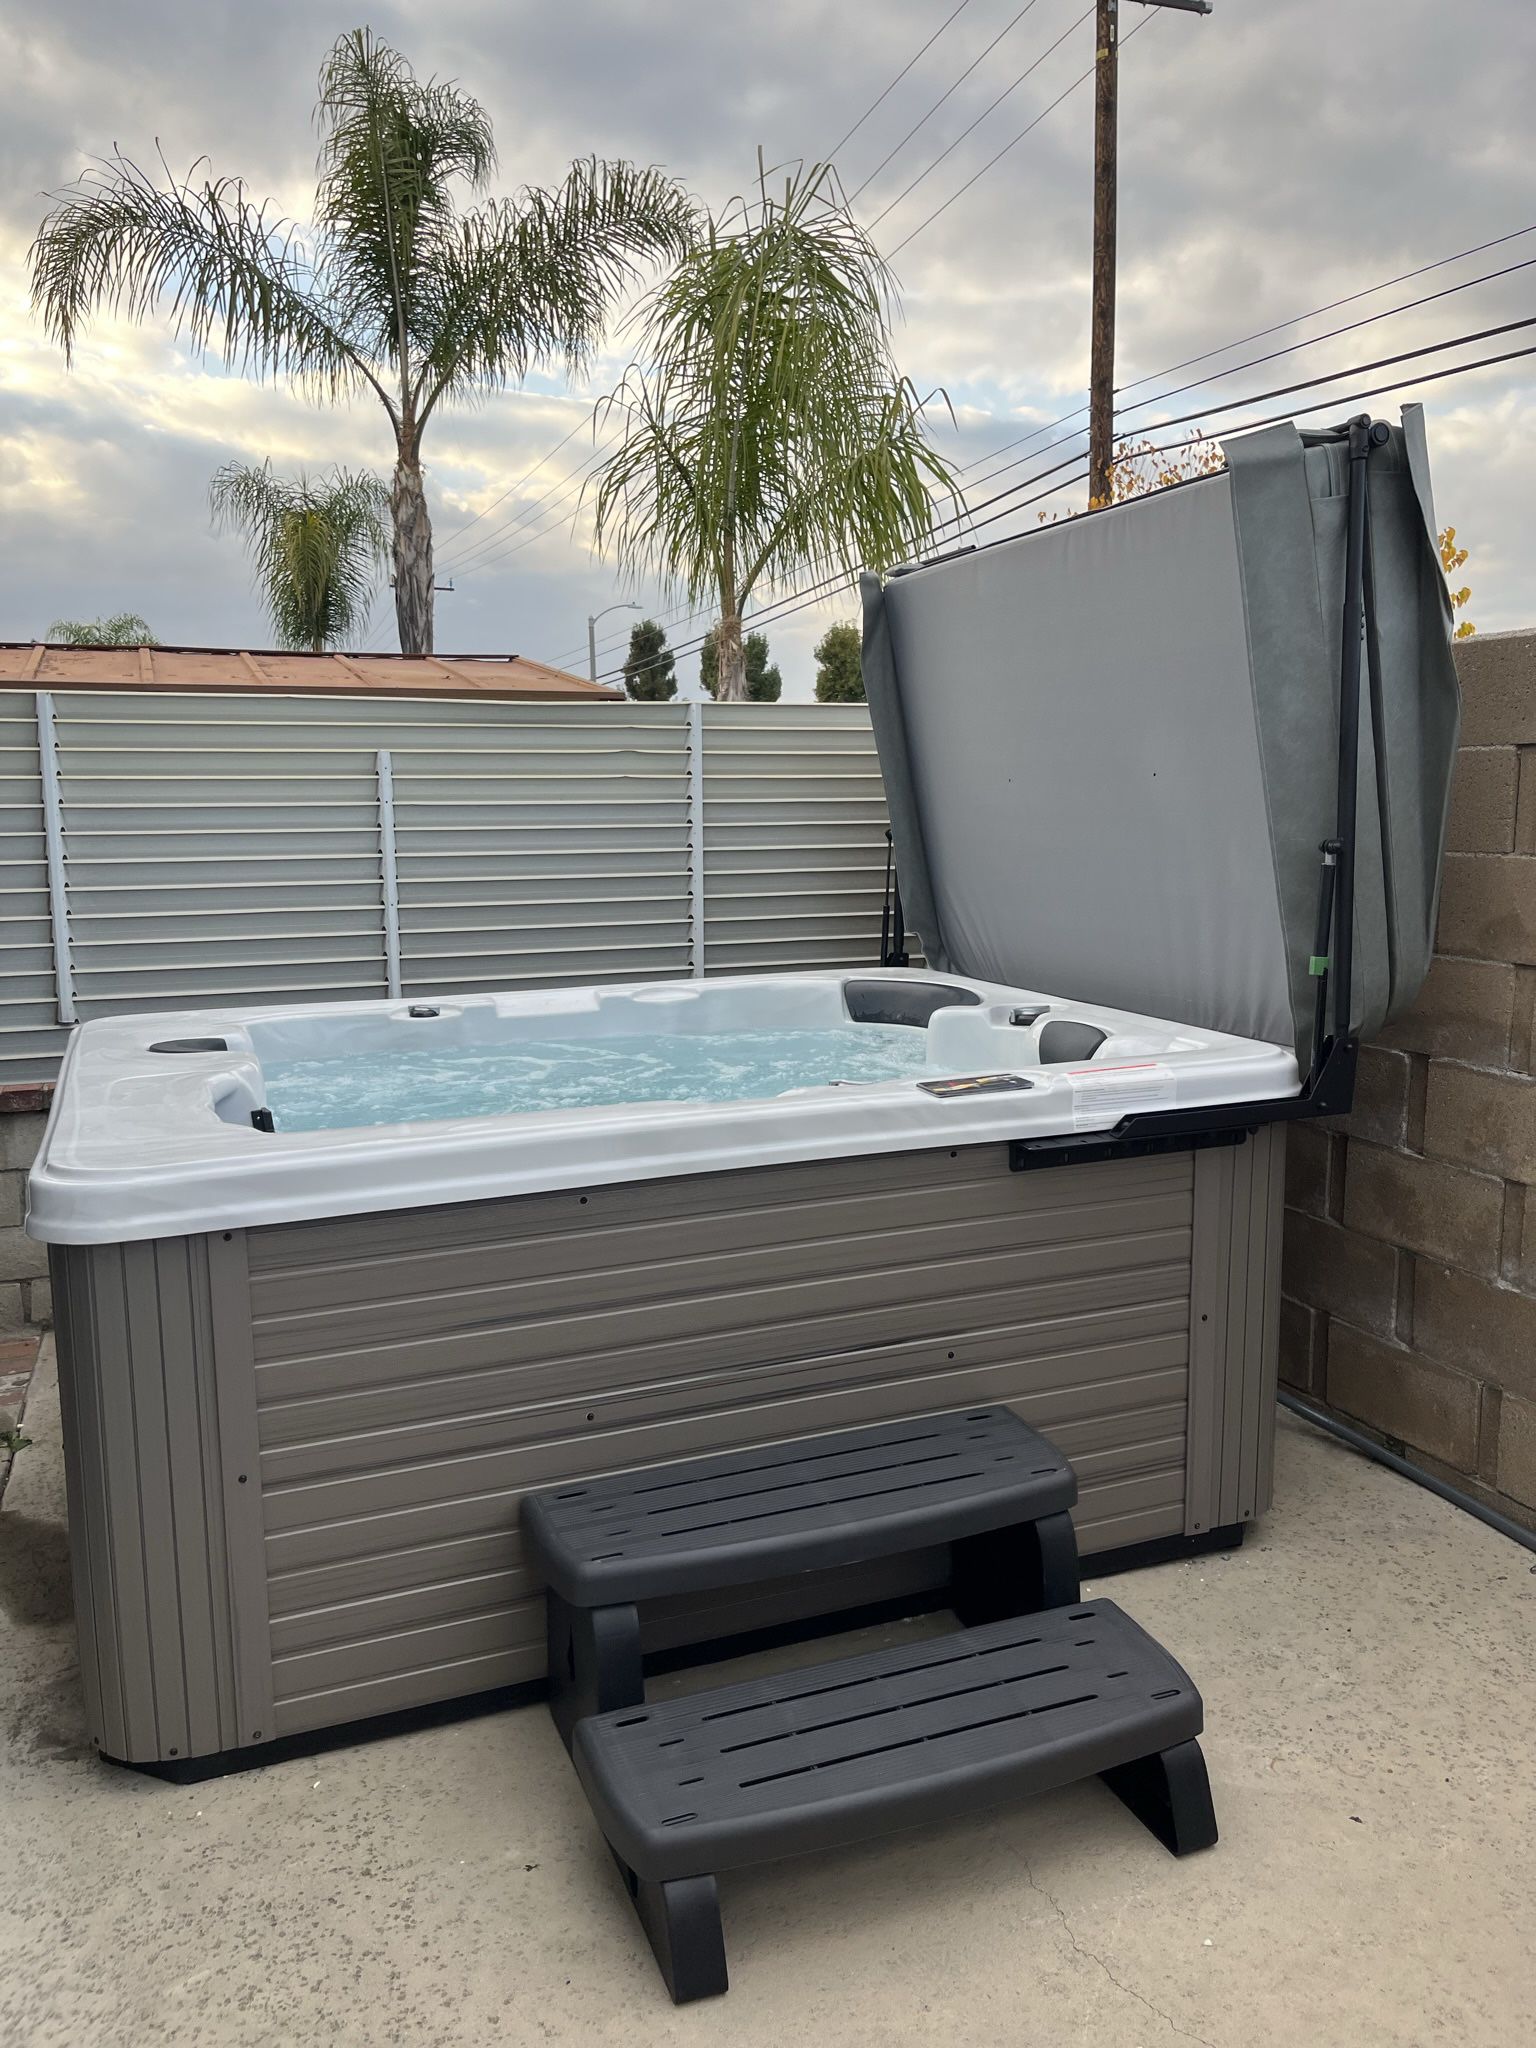 3 Seater 4 Seater Hot Tub Spa